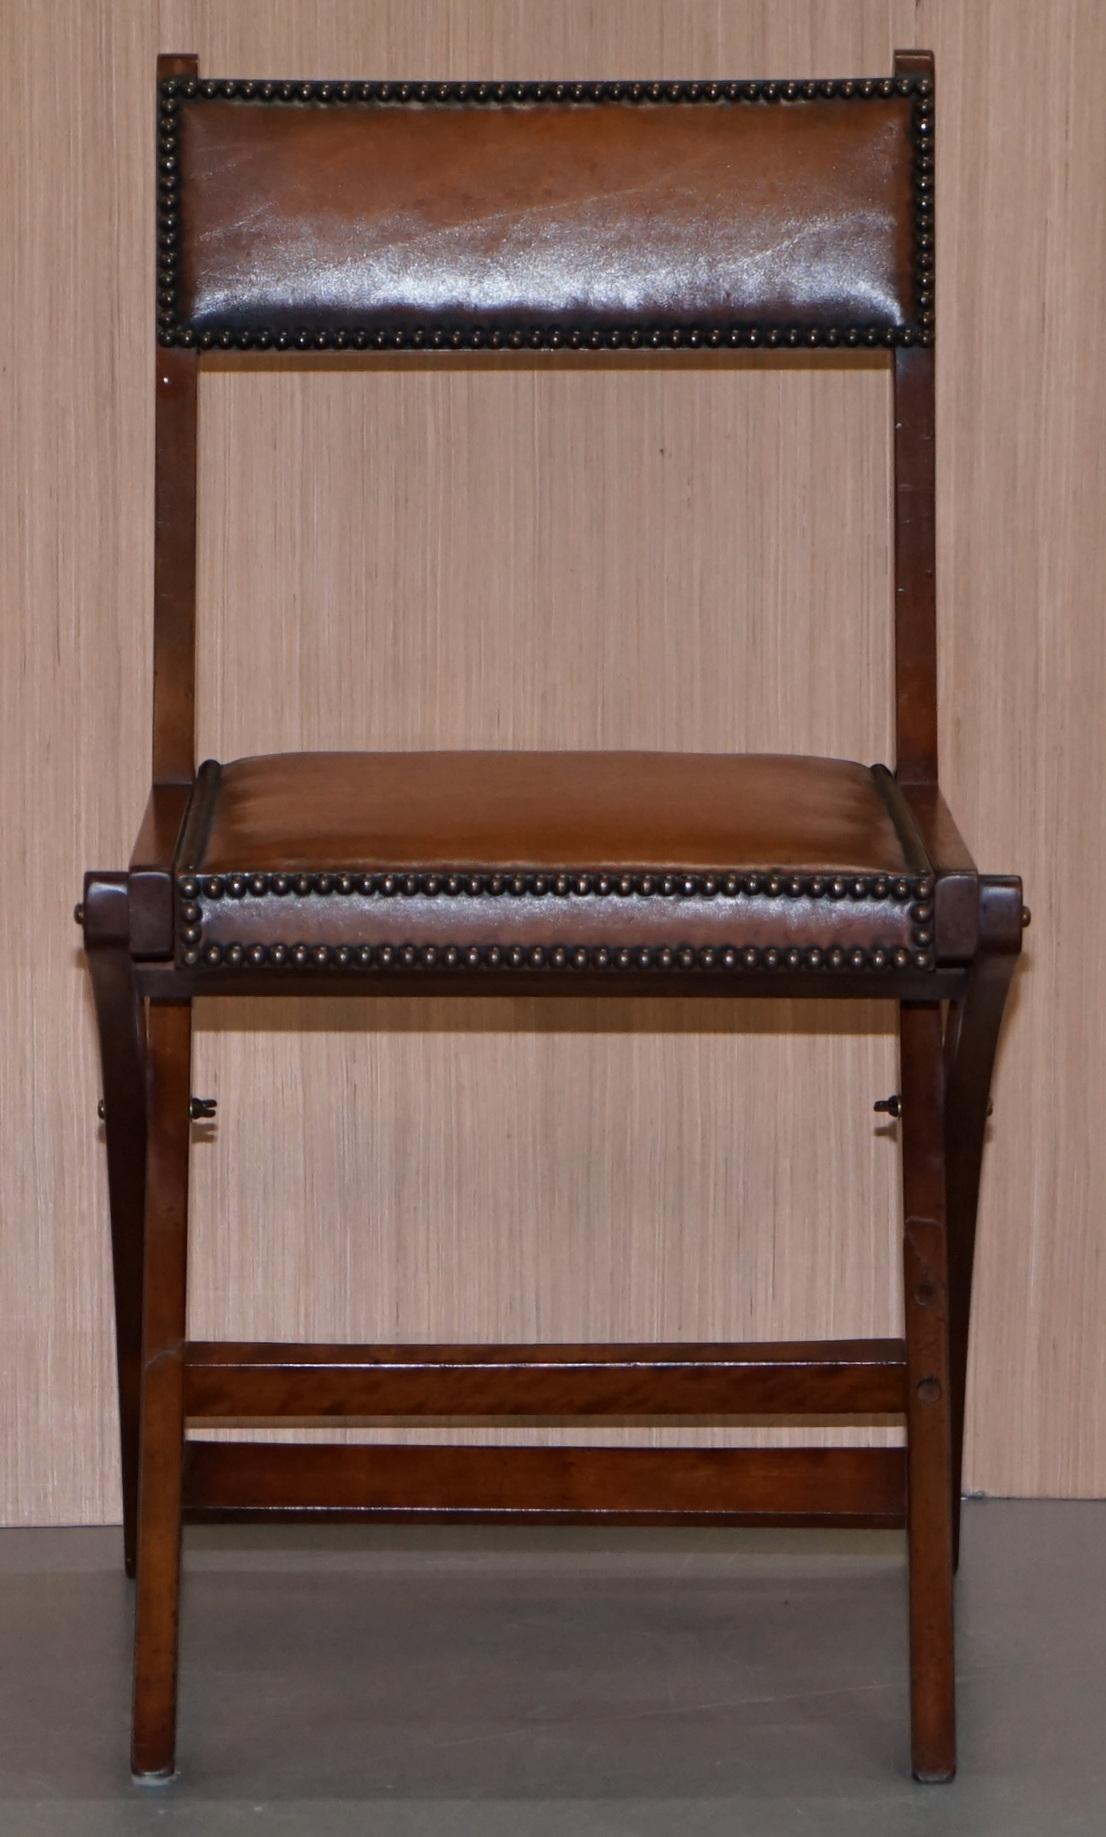 We are delighted to offer for sale this stunning handmade in England R.E.H Kennedy for Harrods London mahogany and brown leather military Campaign desk chair

This is a very good looking, comfortable and compact office chair, the frame is solid